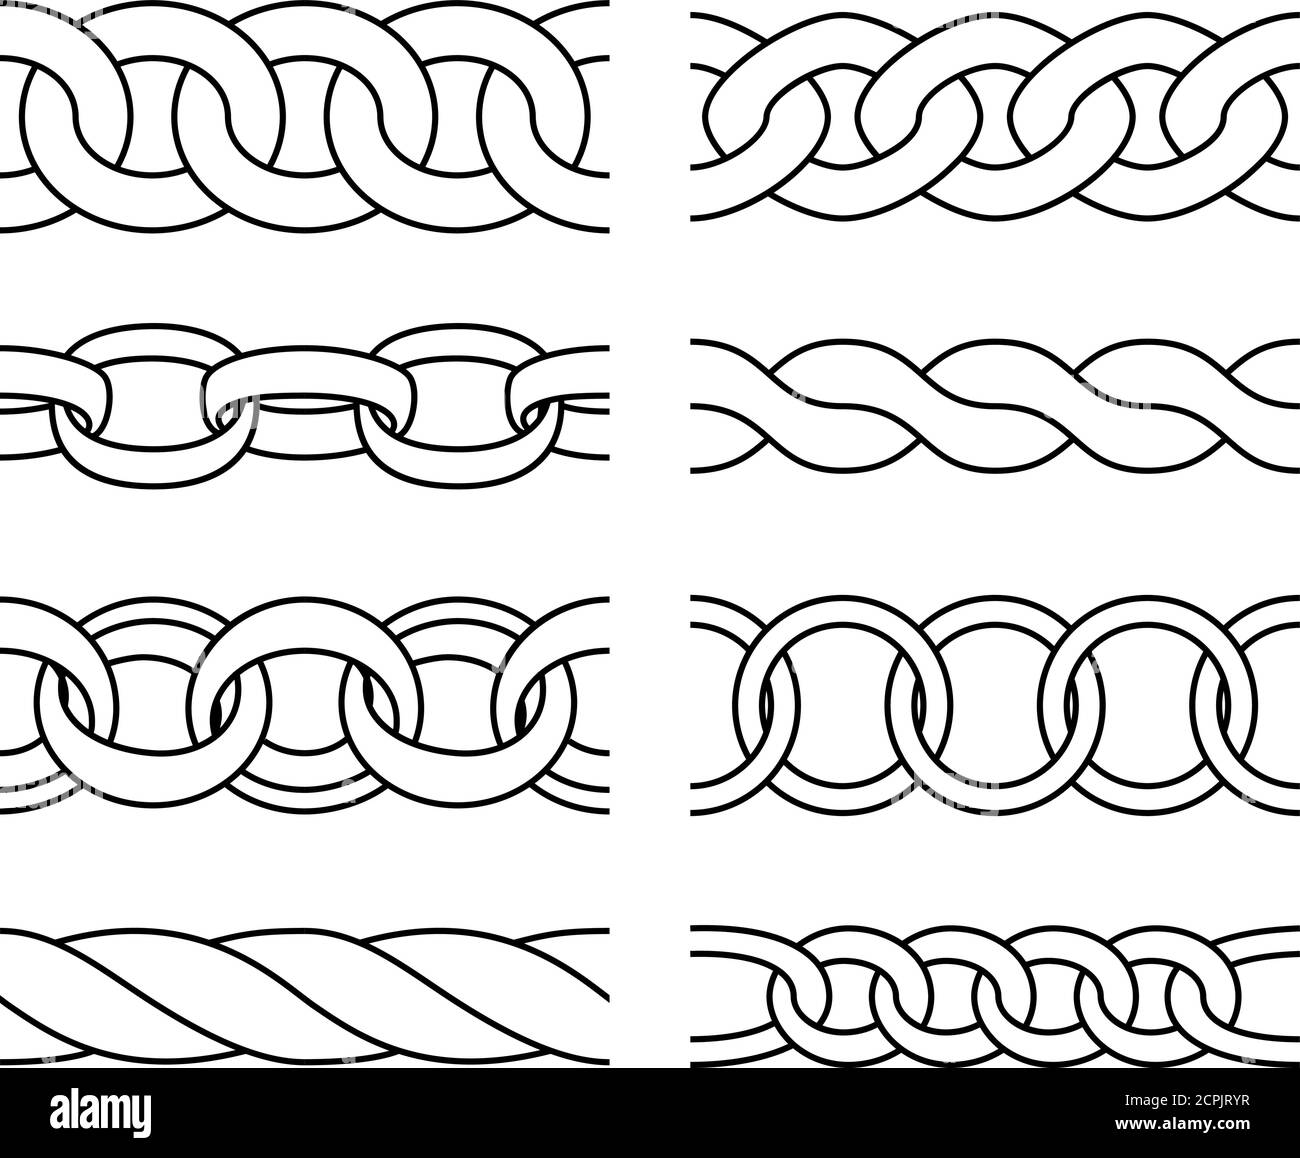 chains drawing